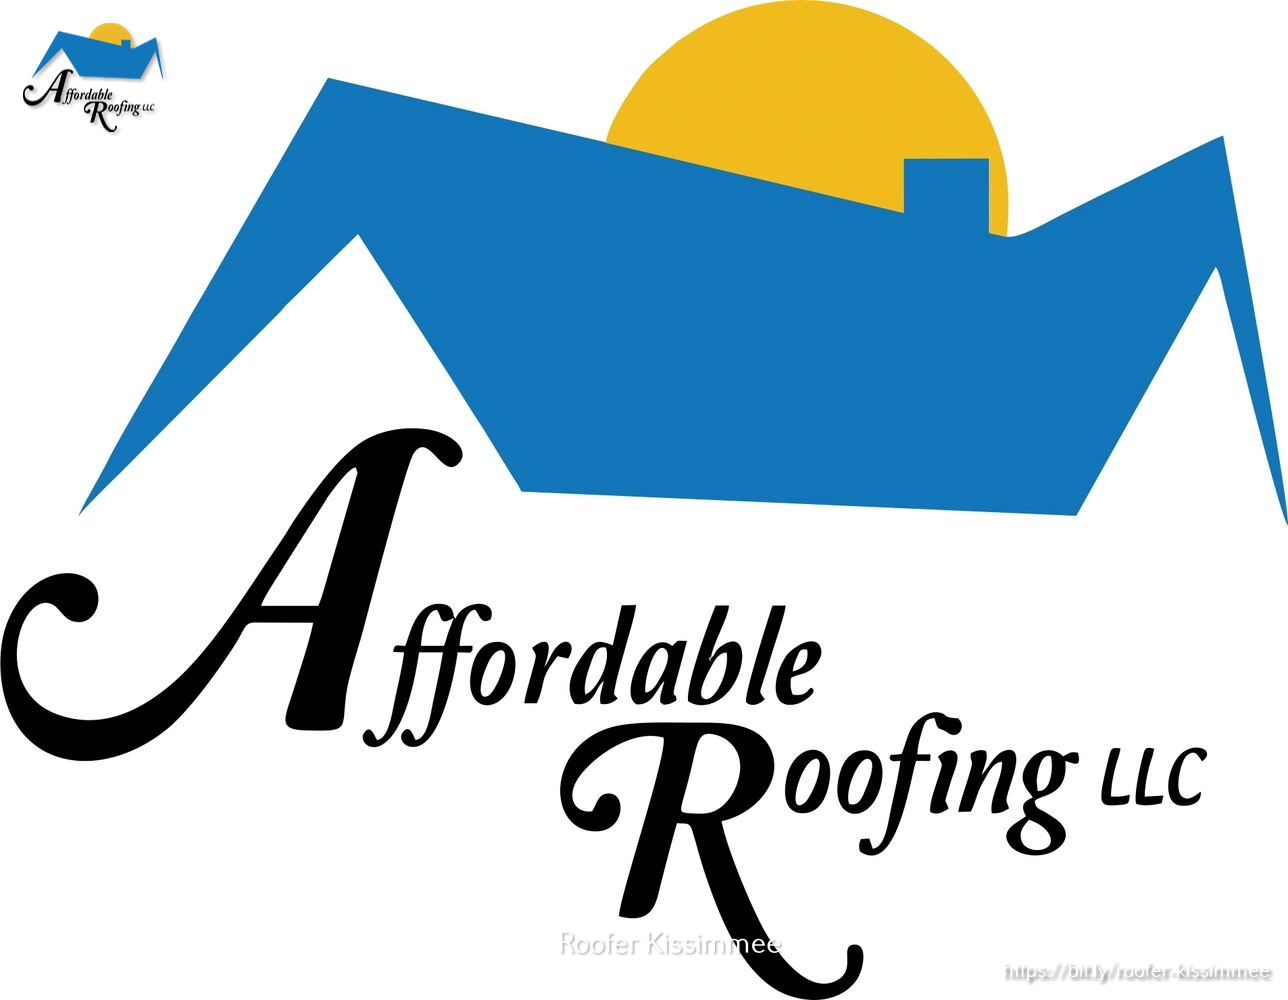 Affordable Roofing, LLC Highlights the Qualities of a Good Roofing Company